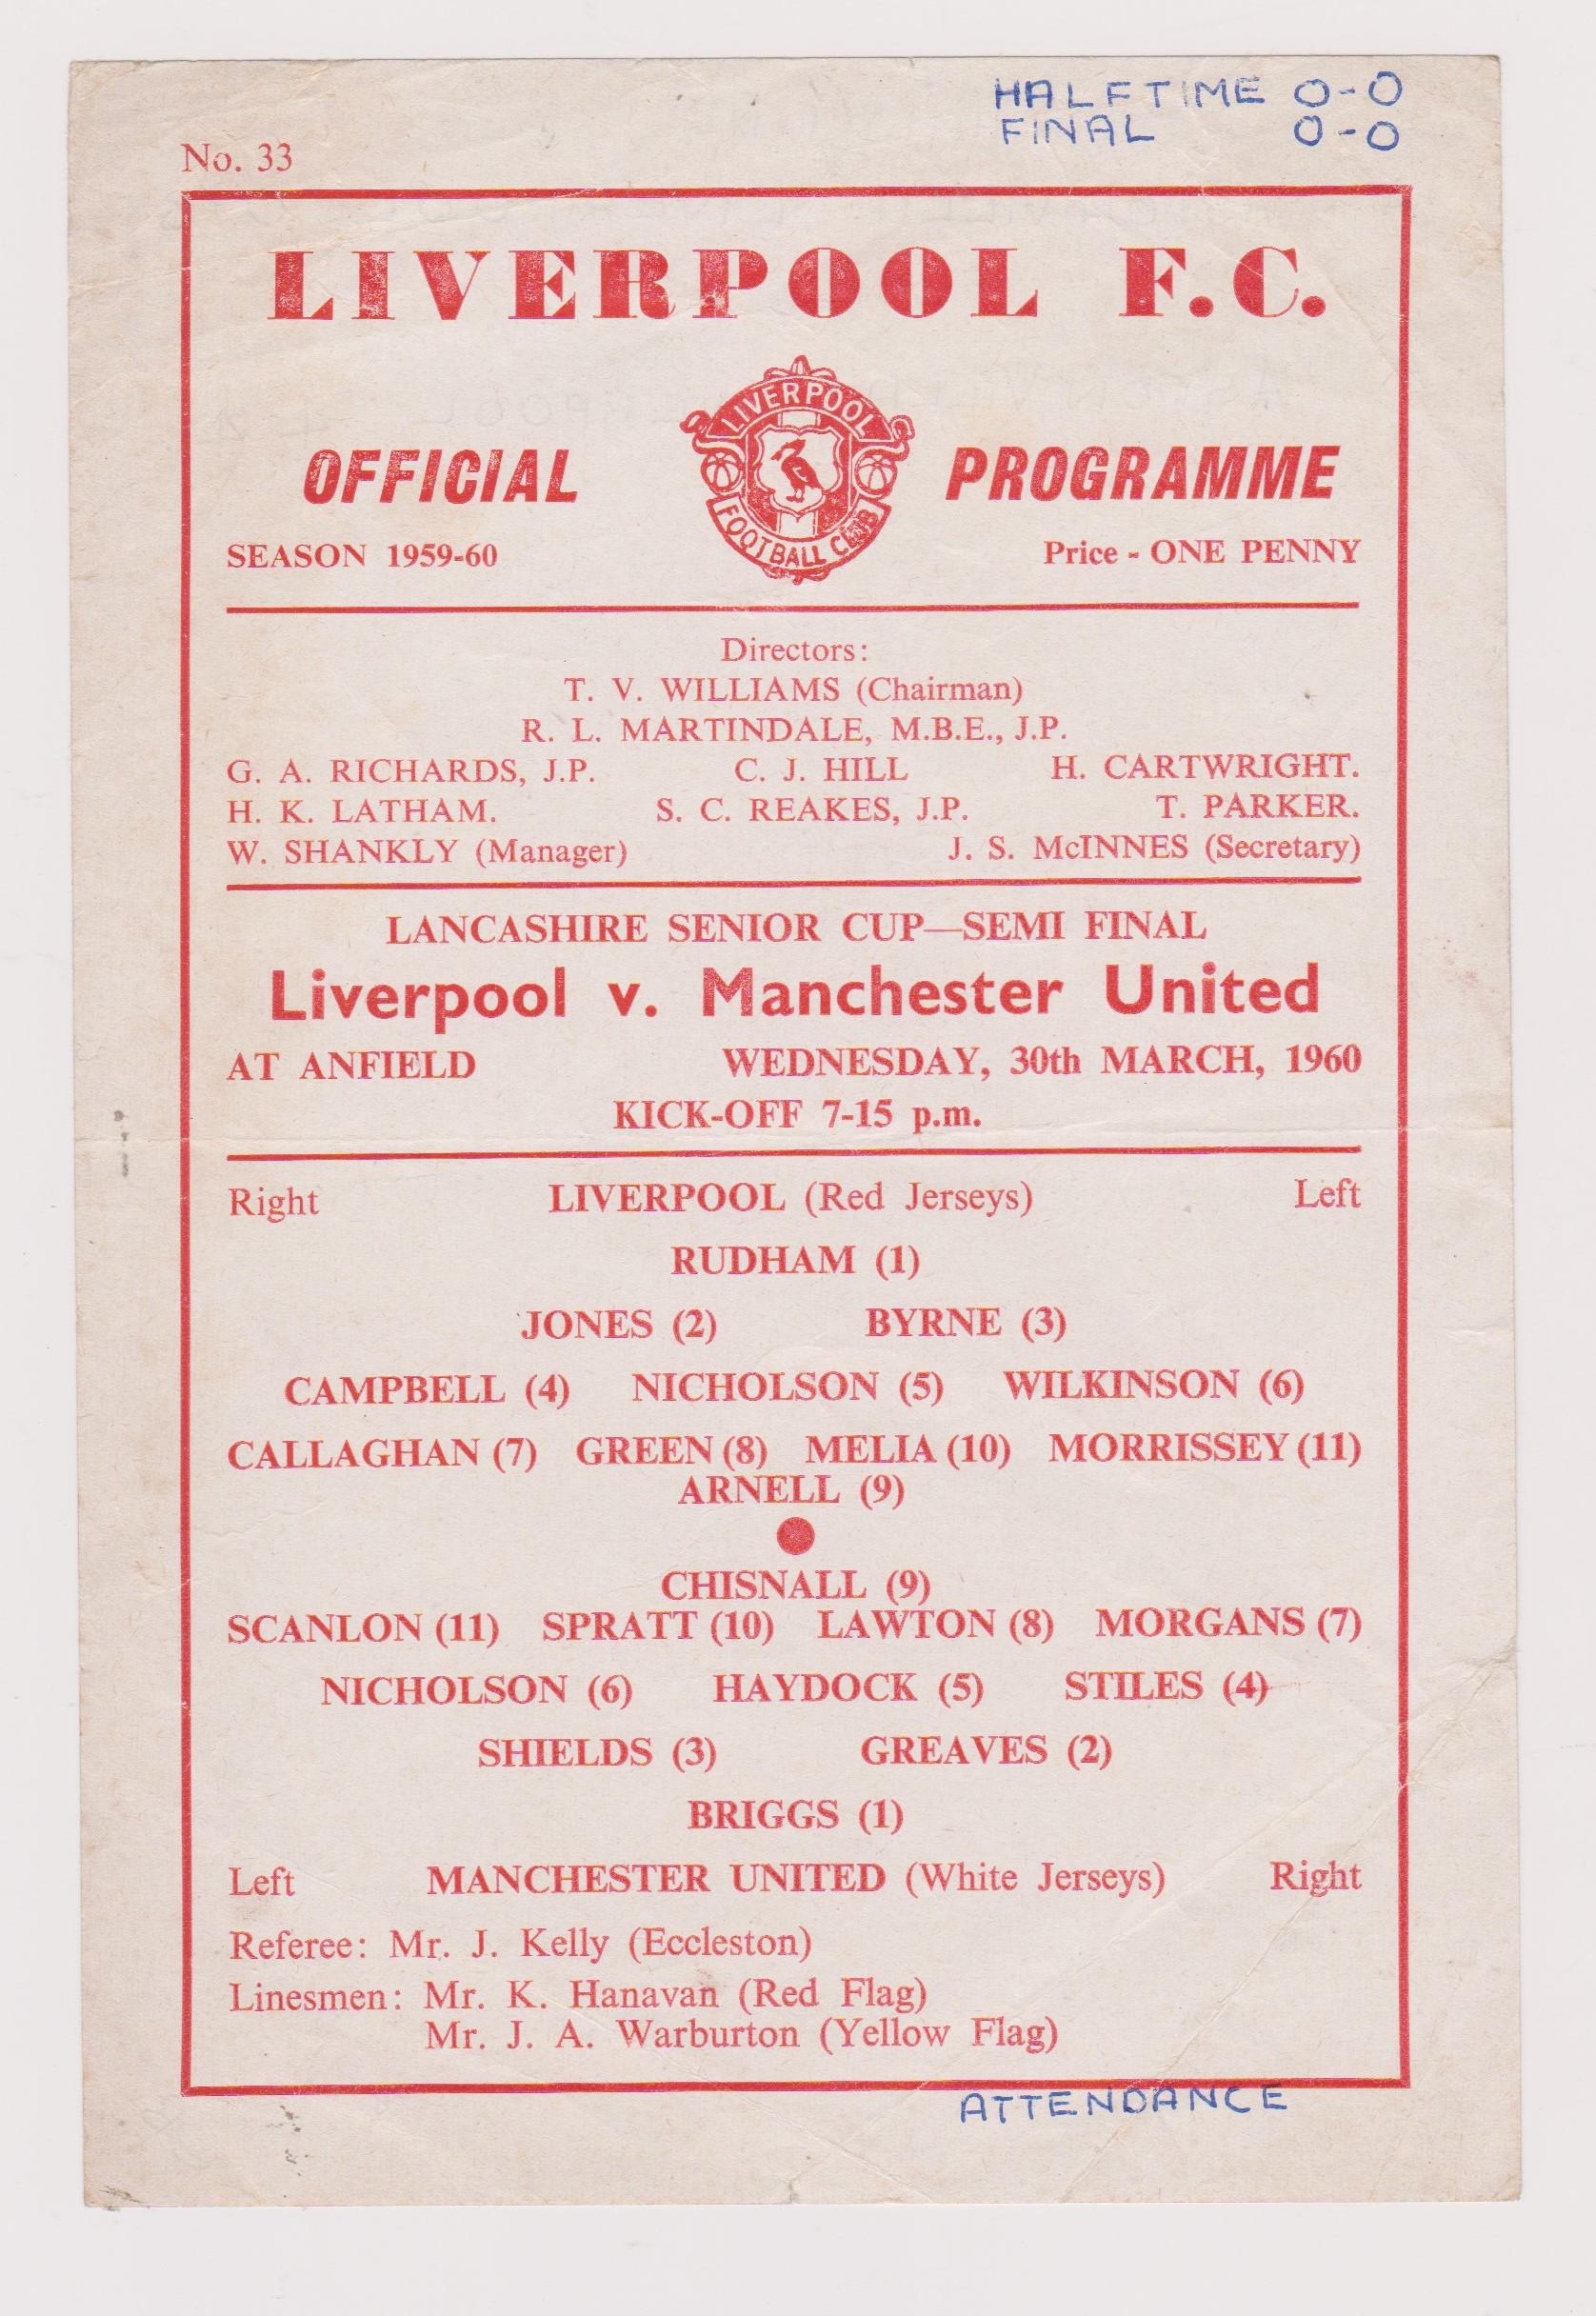 Single sheet programme Liverpool v Manchester United Lancashire Senior Cup Semi Final 30th March